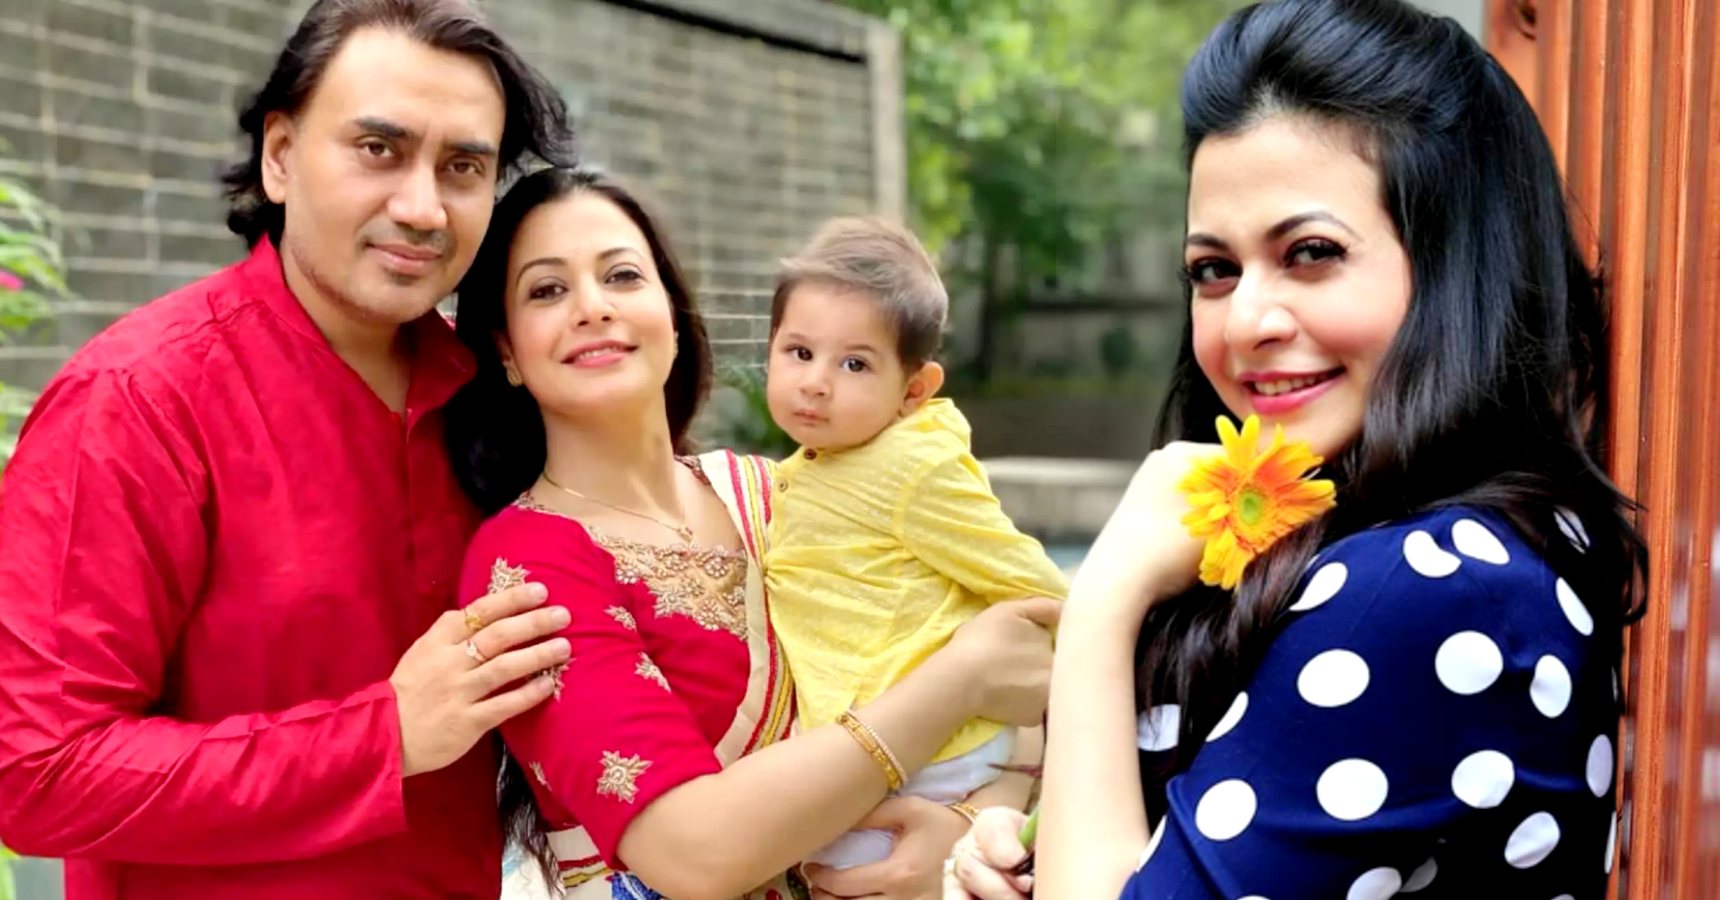 Tollywood actress Koel Mallick is reportedly pregnant again